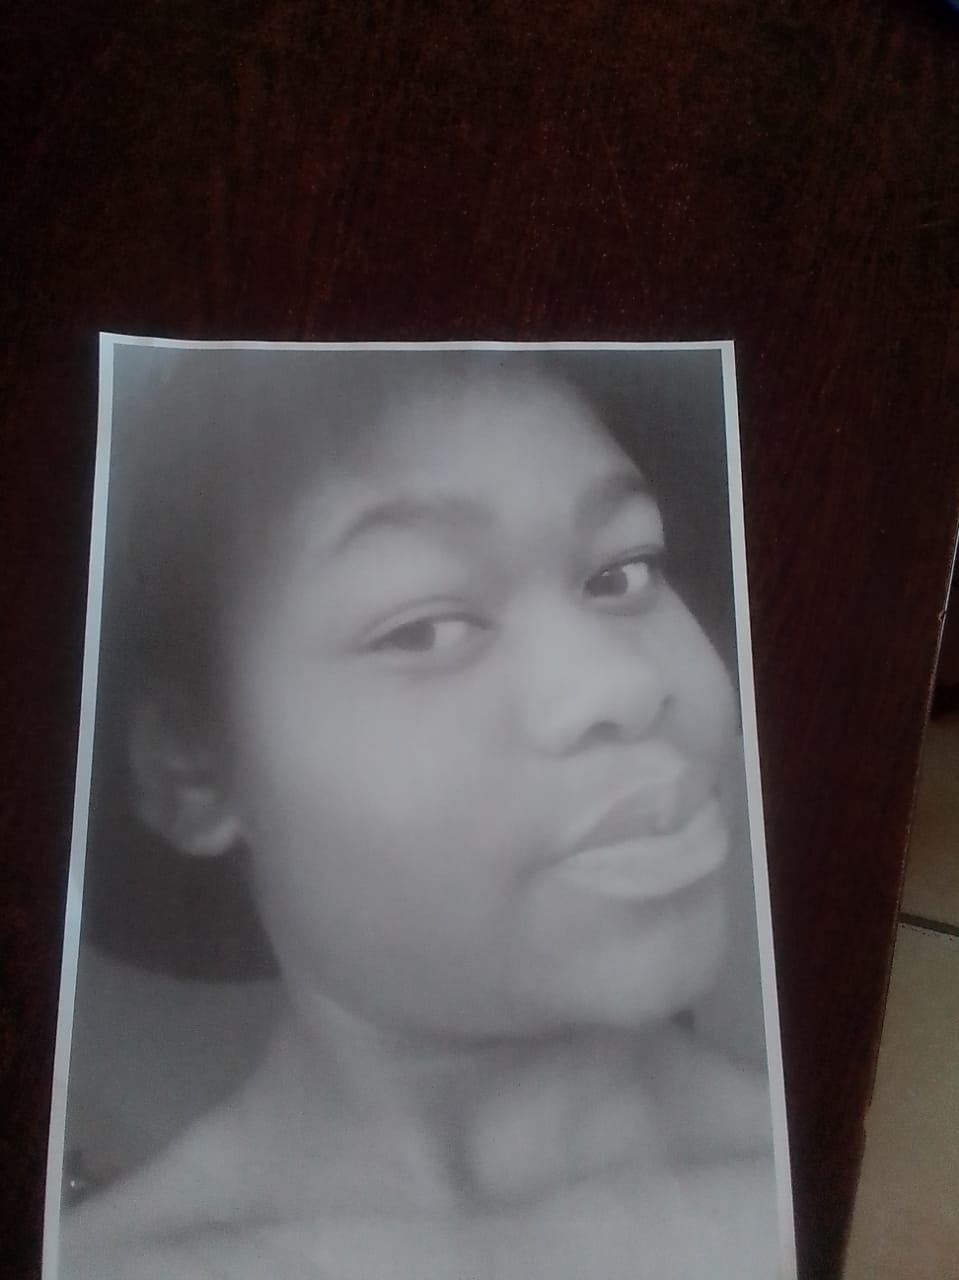 Mashashane Saps Appeal For Information To Locate A Missing 14 Year Old Girl Za 